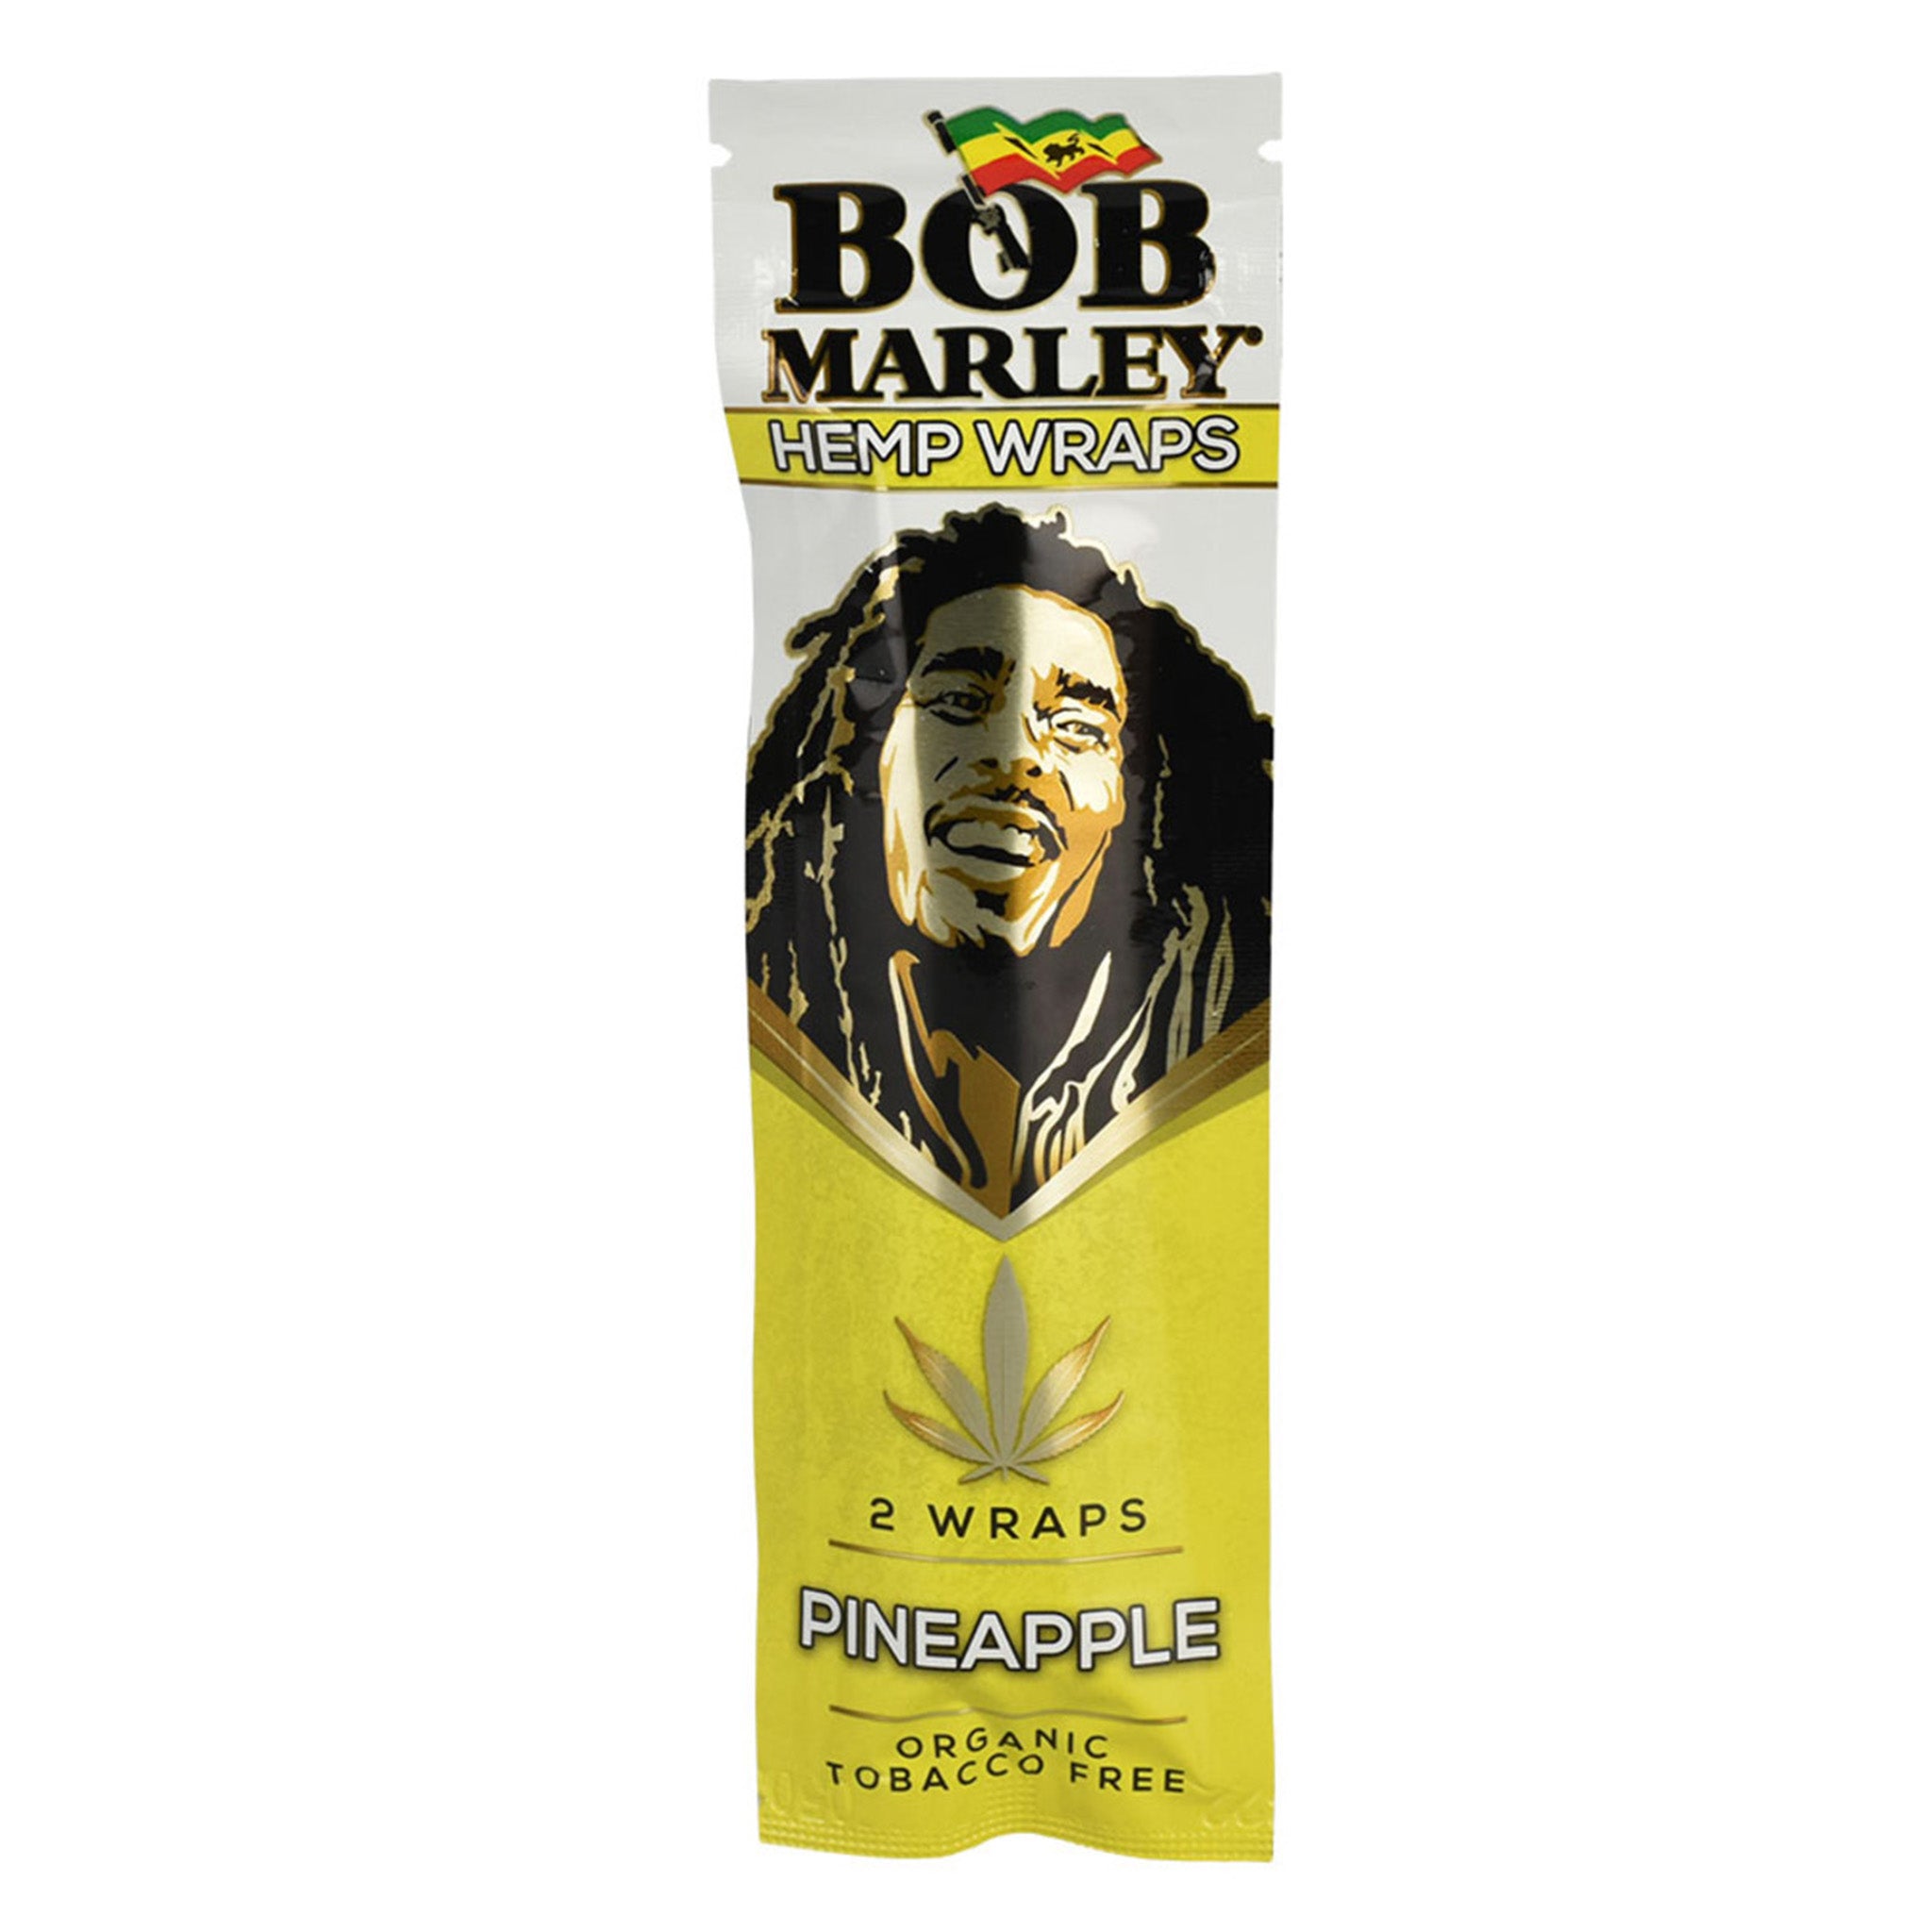 Bob Marley Hemp Wraps -Two Packs Rolling Papers Ultimate Brands Pineapple 